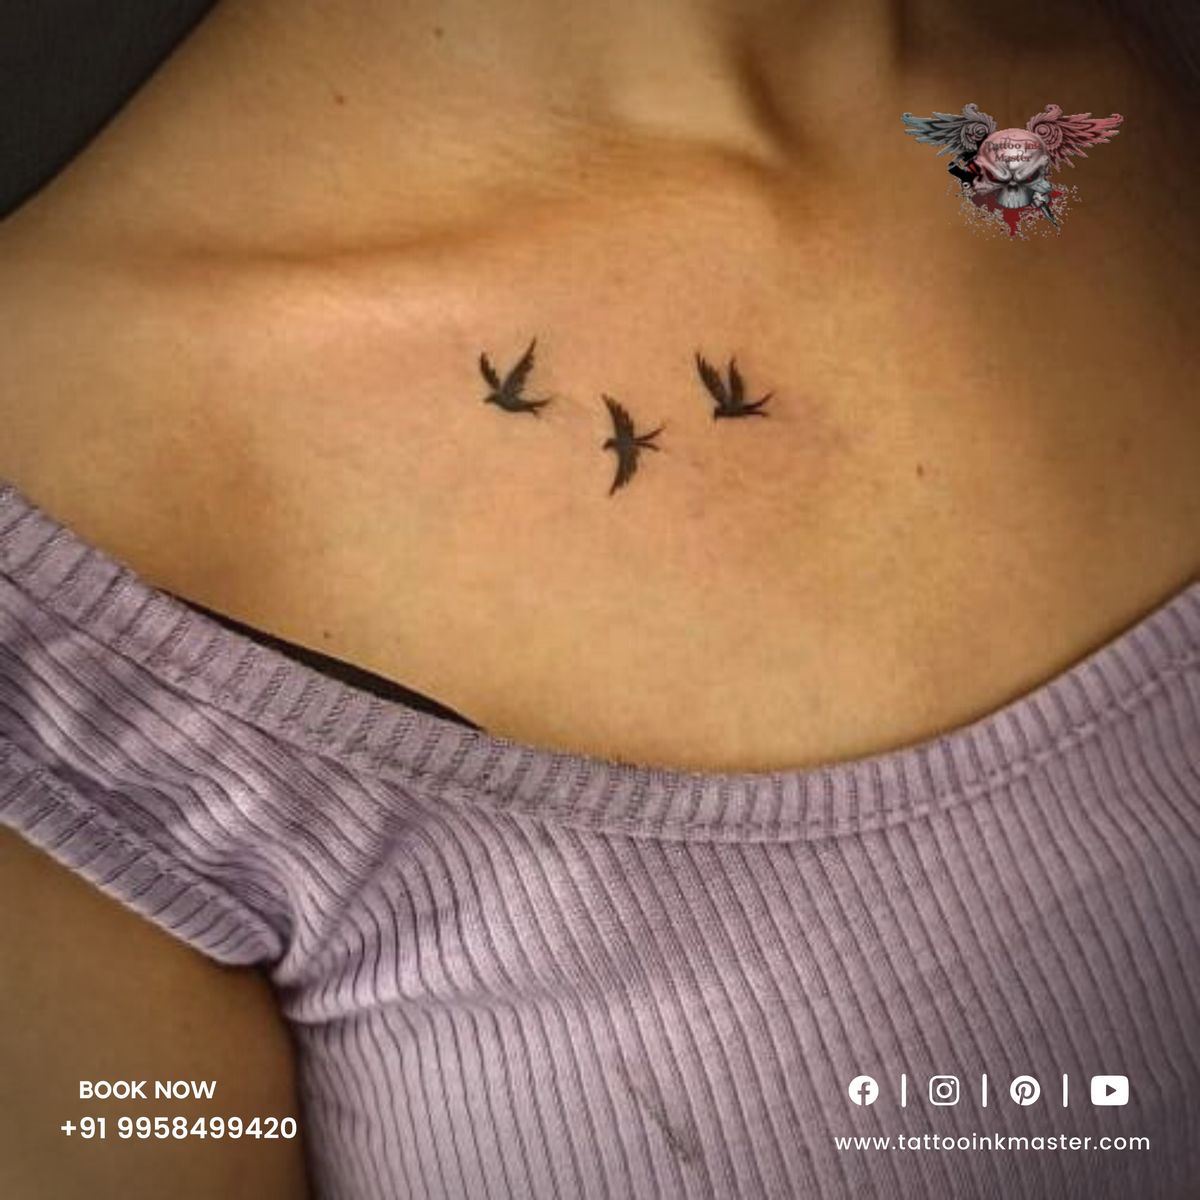 The Three Free Birds Of The Open Sky | Tattoo Ink Master